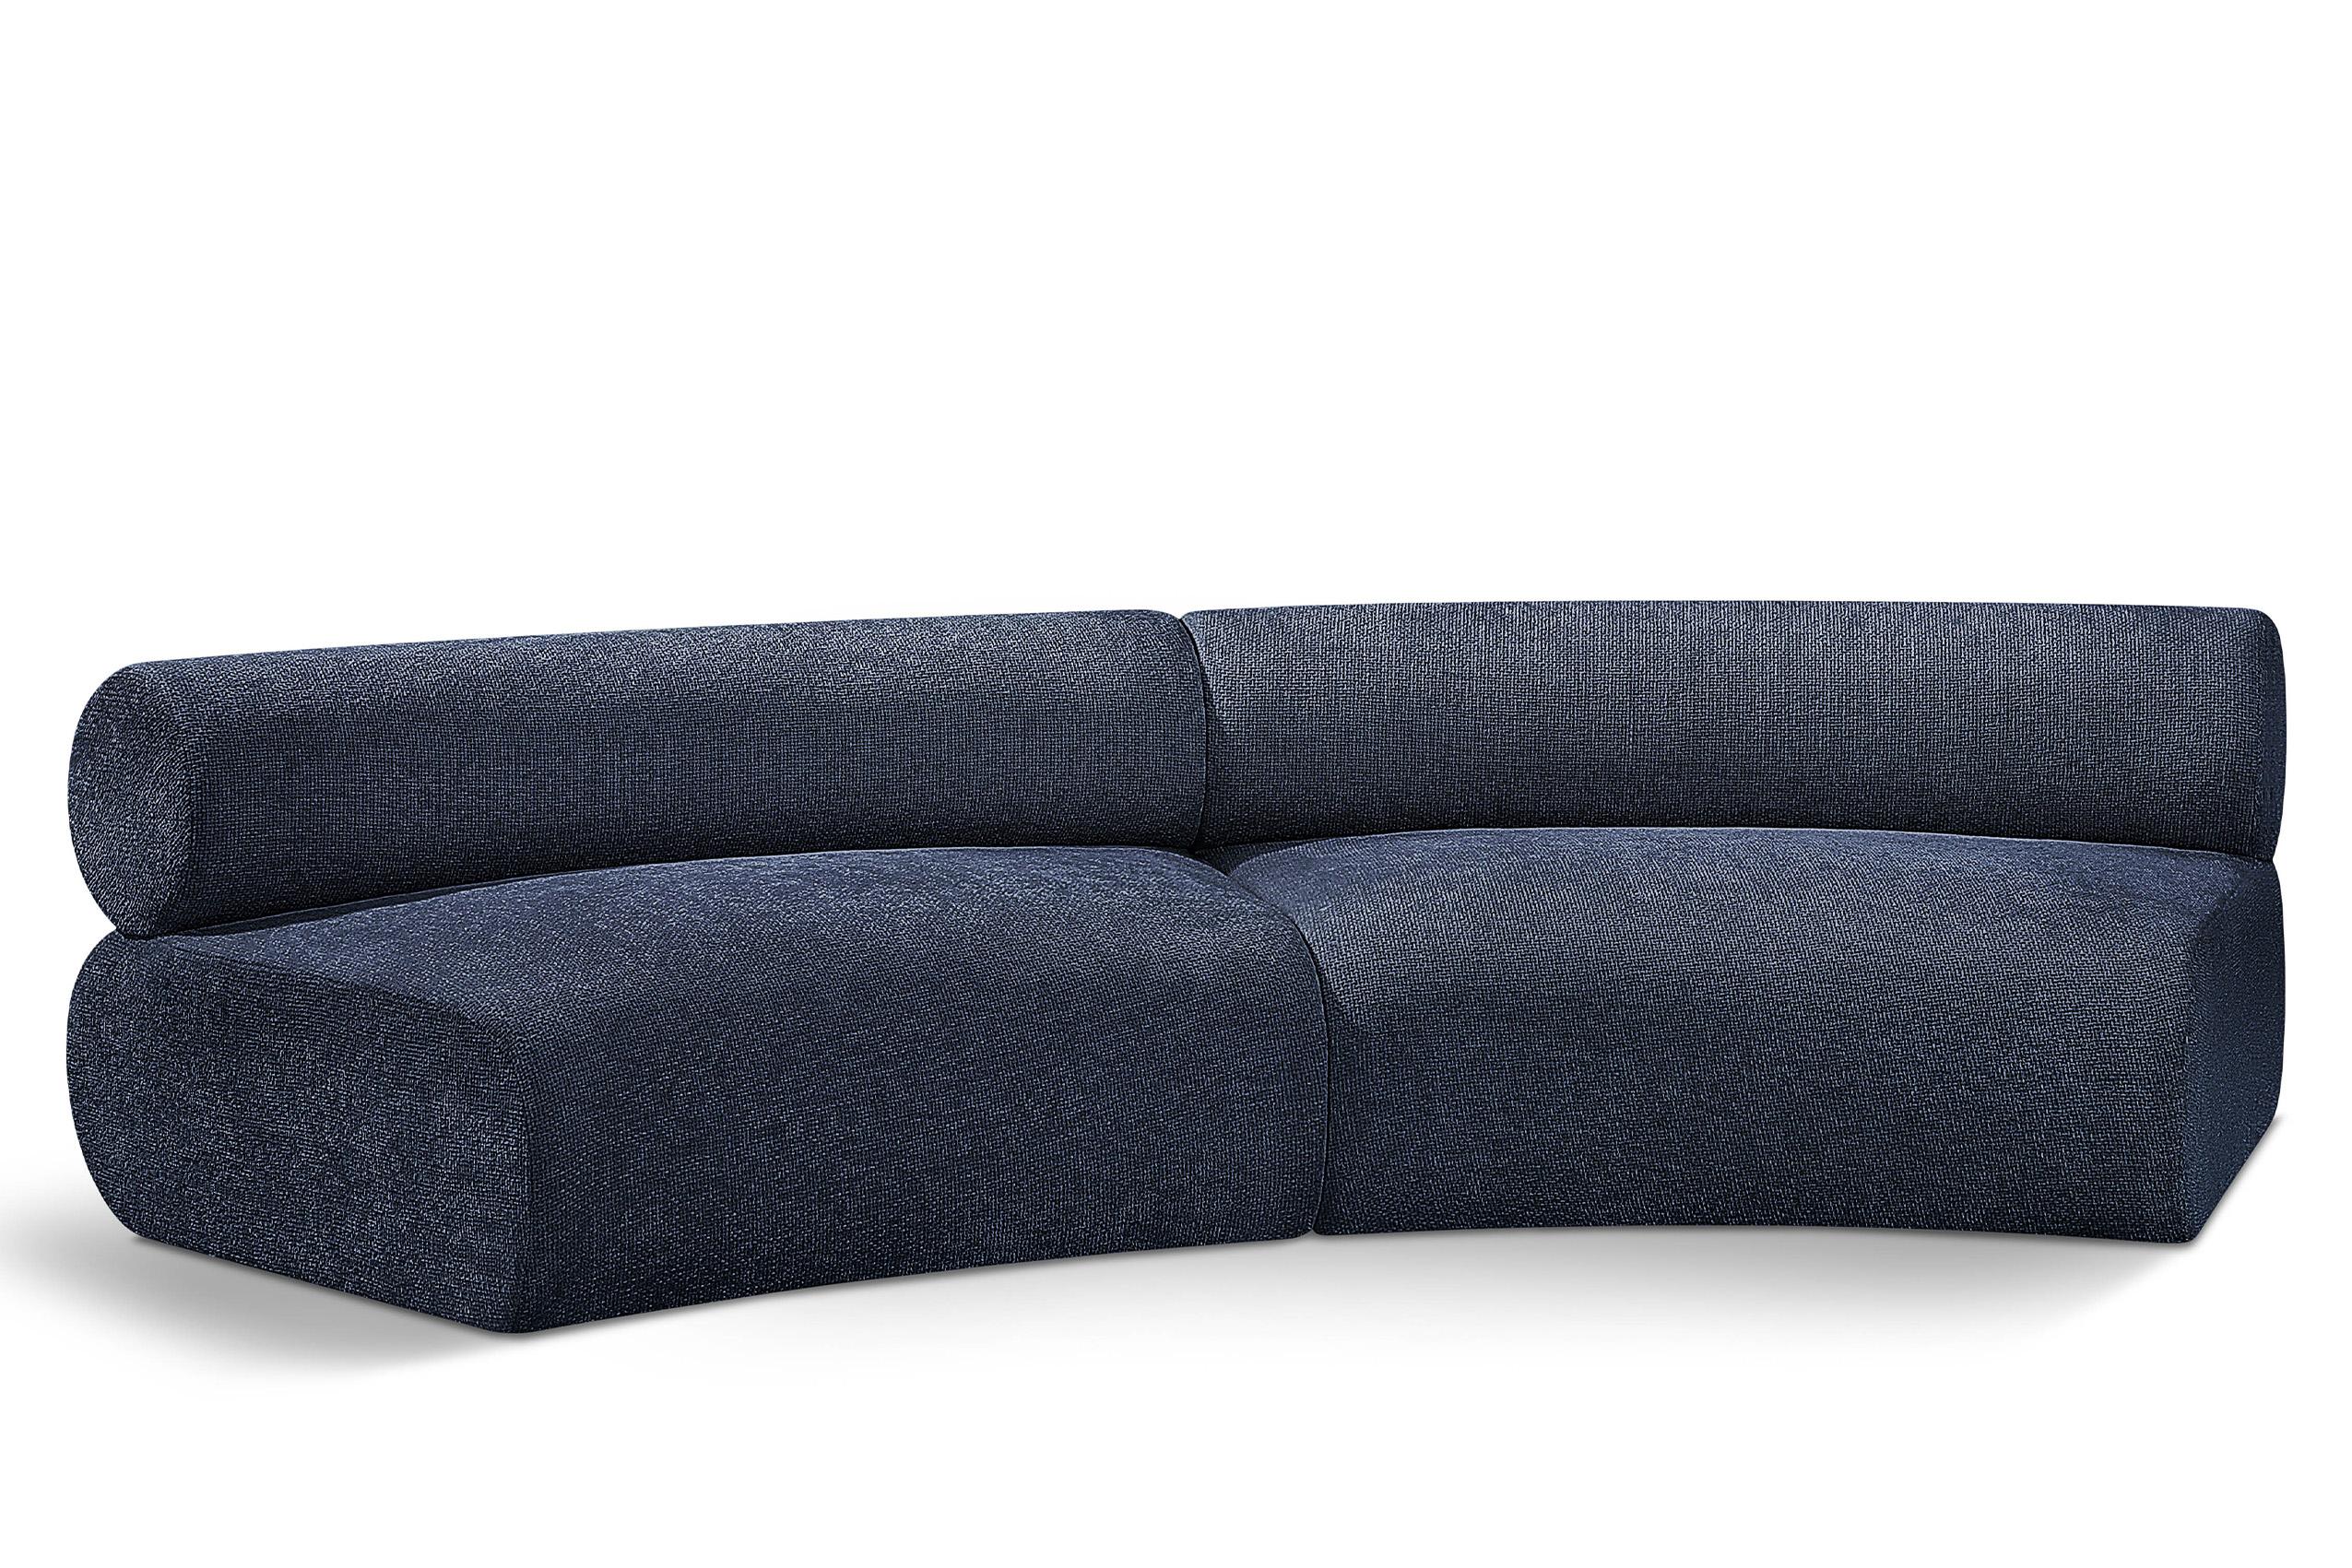 Contemporary, Modern Modular Sectional Sofa Bale 114Navy-S2A 114Navy-S2A in Navy Chenille